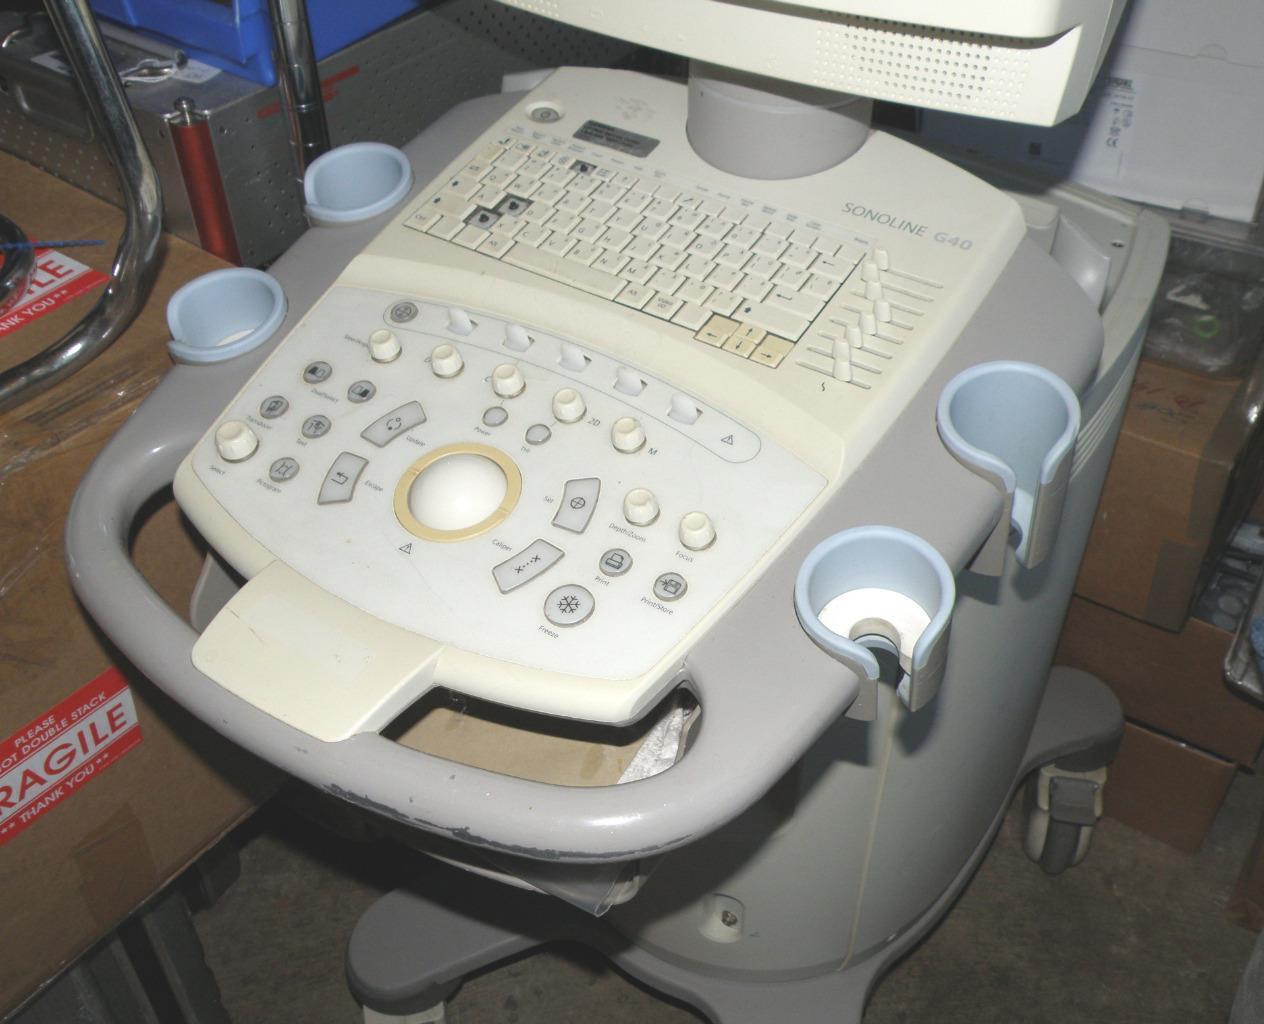 SIEMENS Ultrasound Sonoline G40 FOR PARTS ONLY DIAGNOSTIC ULTRASOUND MACHINES FOR SALE